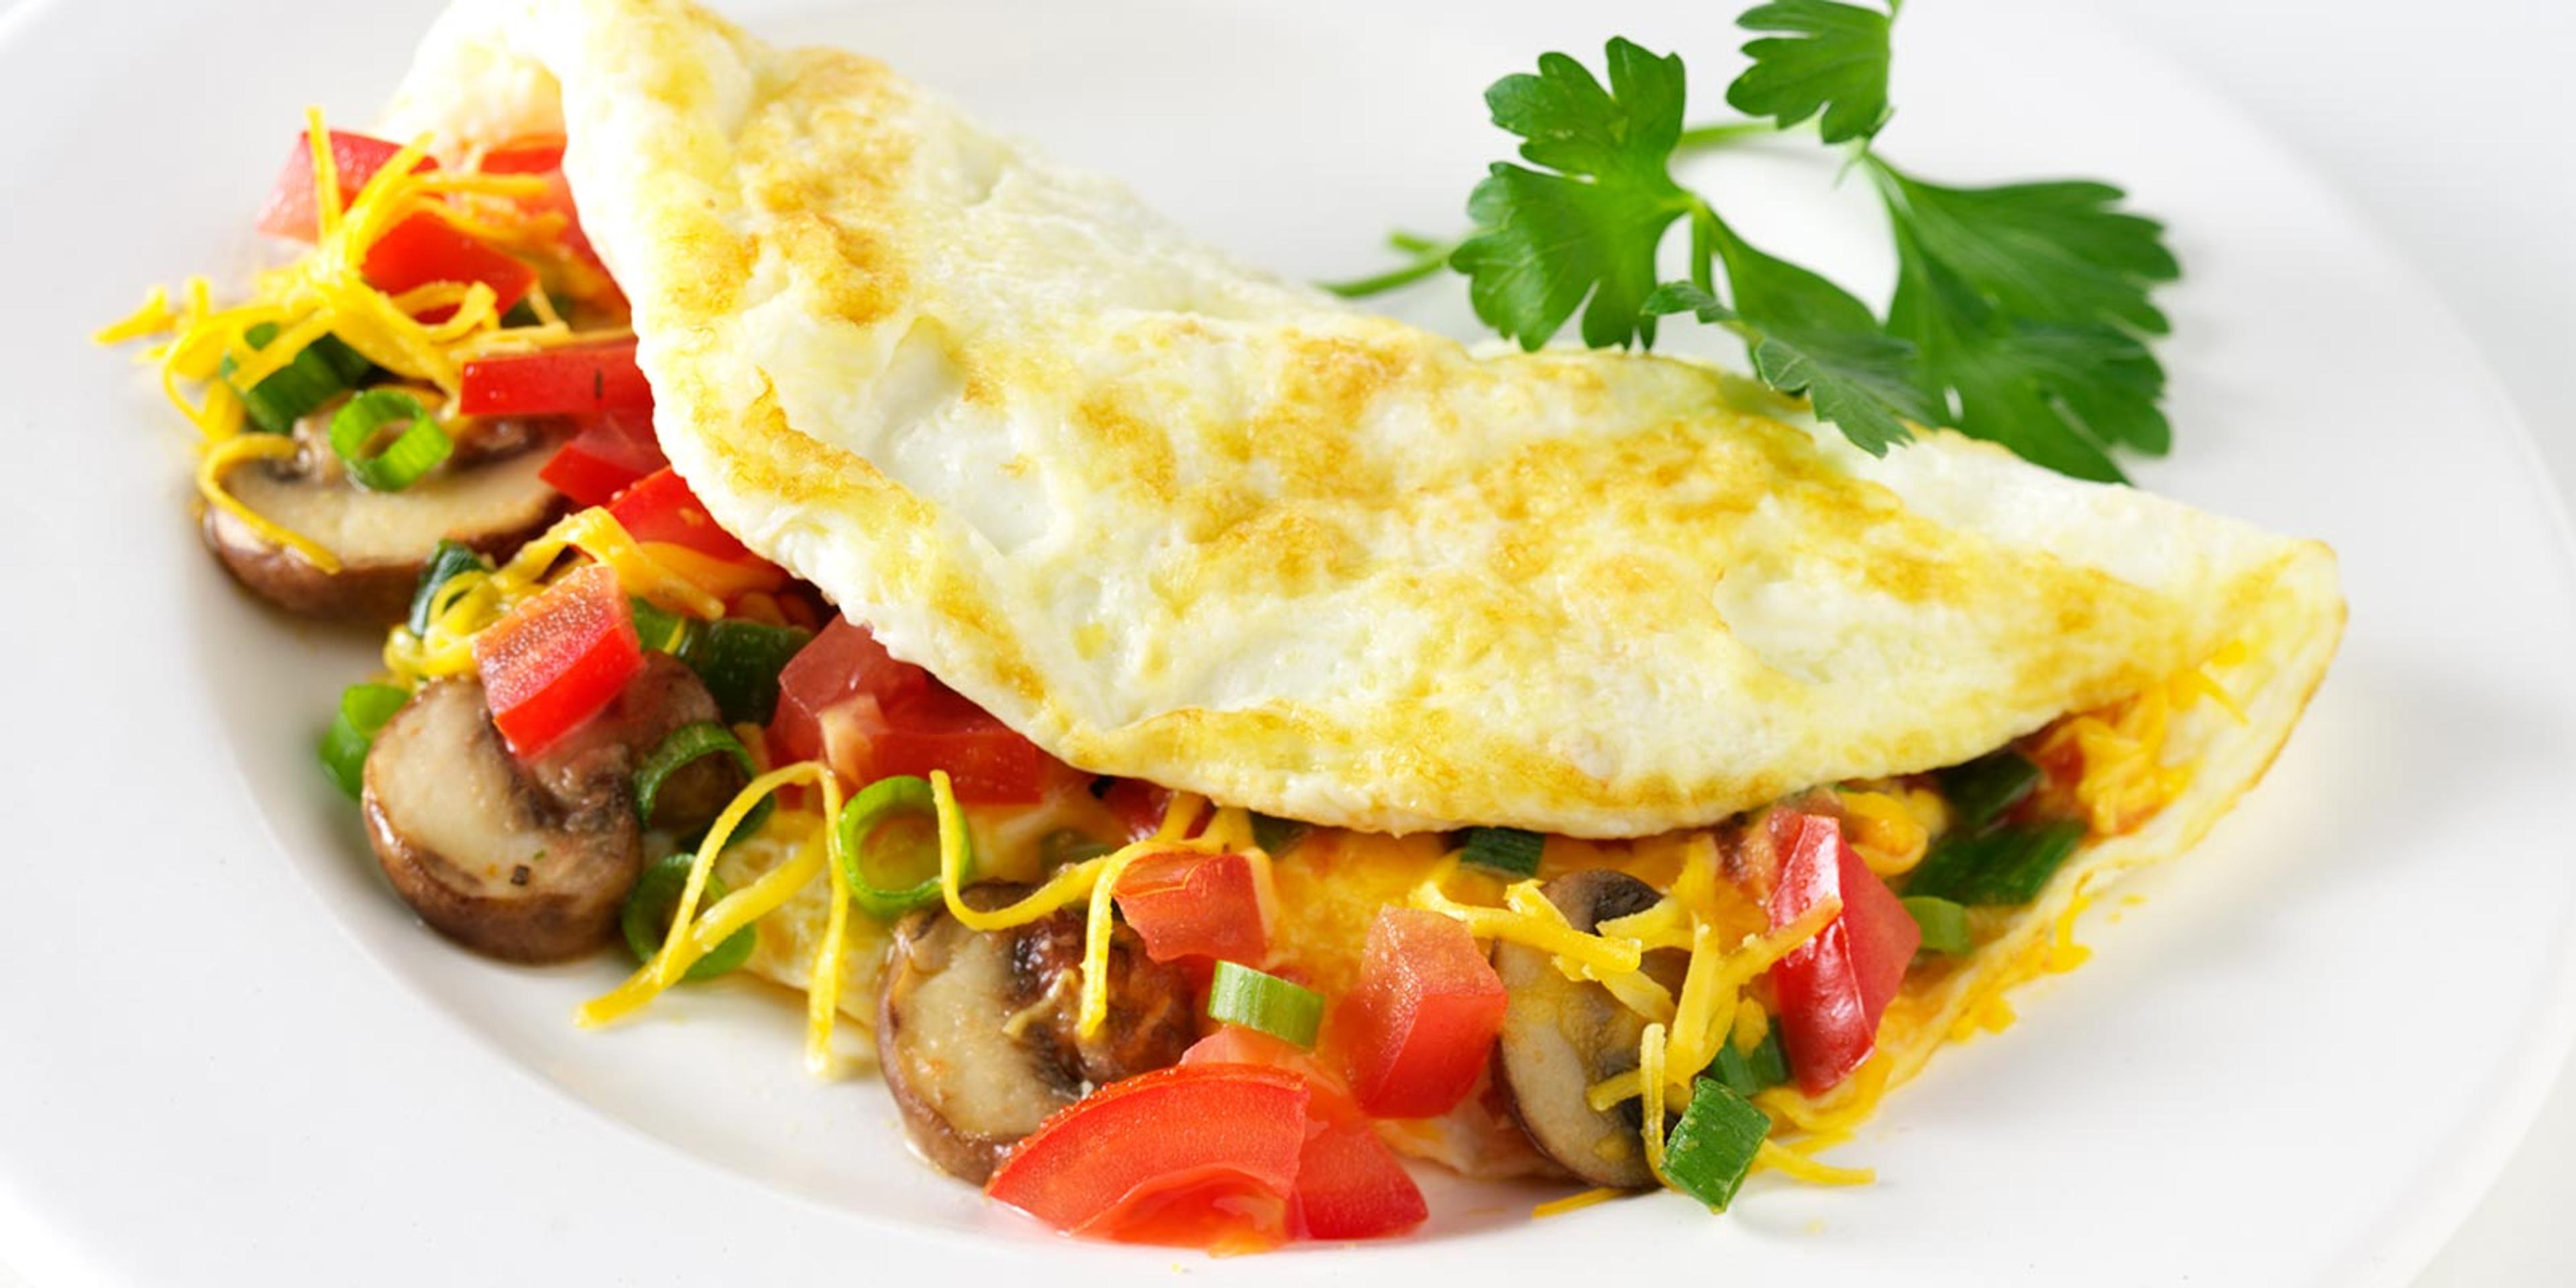 Egg white omelette folded over sauteed mushrooms, tomatoes and green onions with shredded cheese and a sprig of cilantro for garnish. 